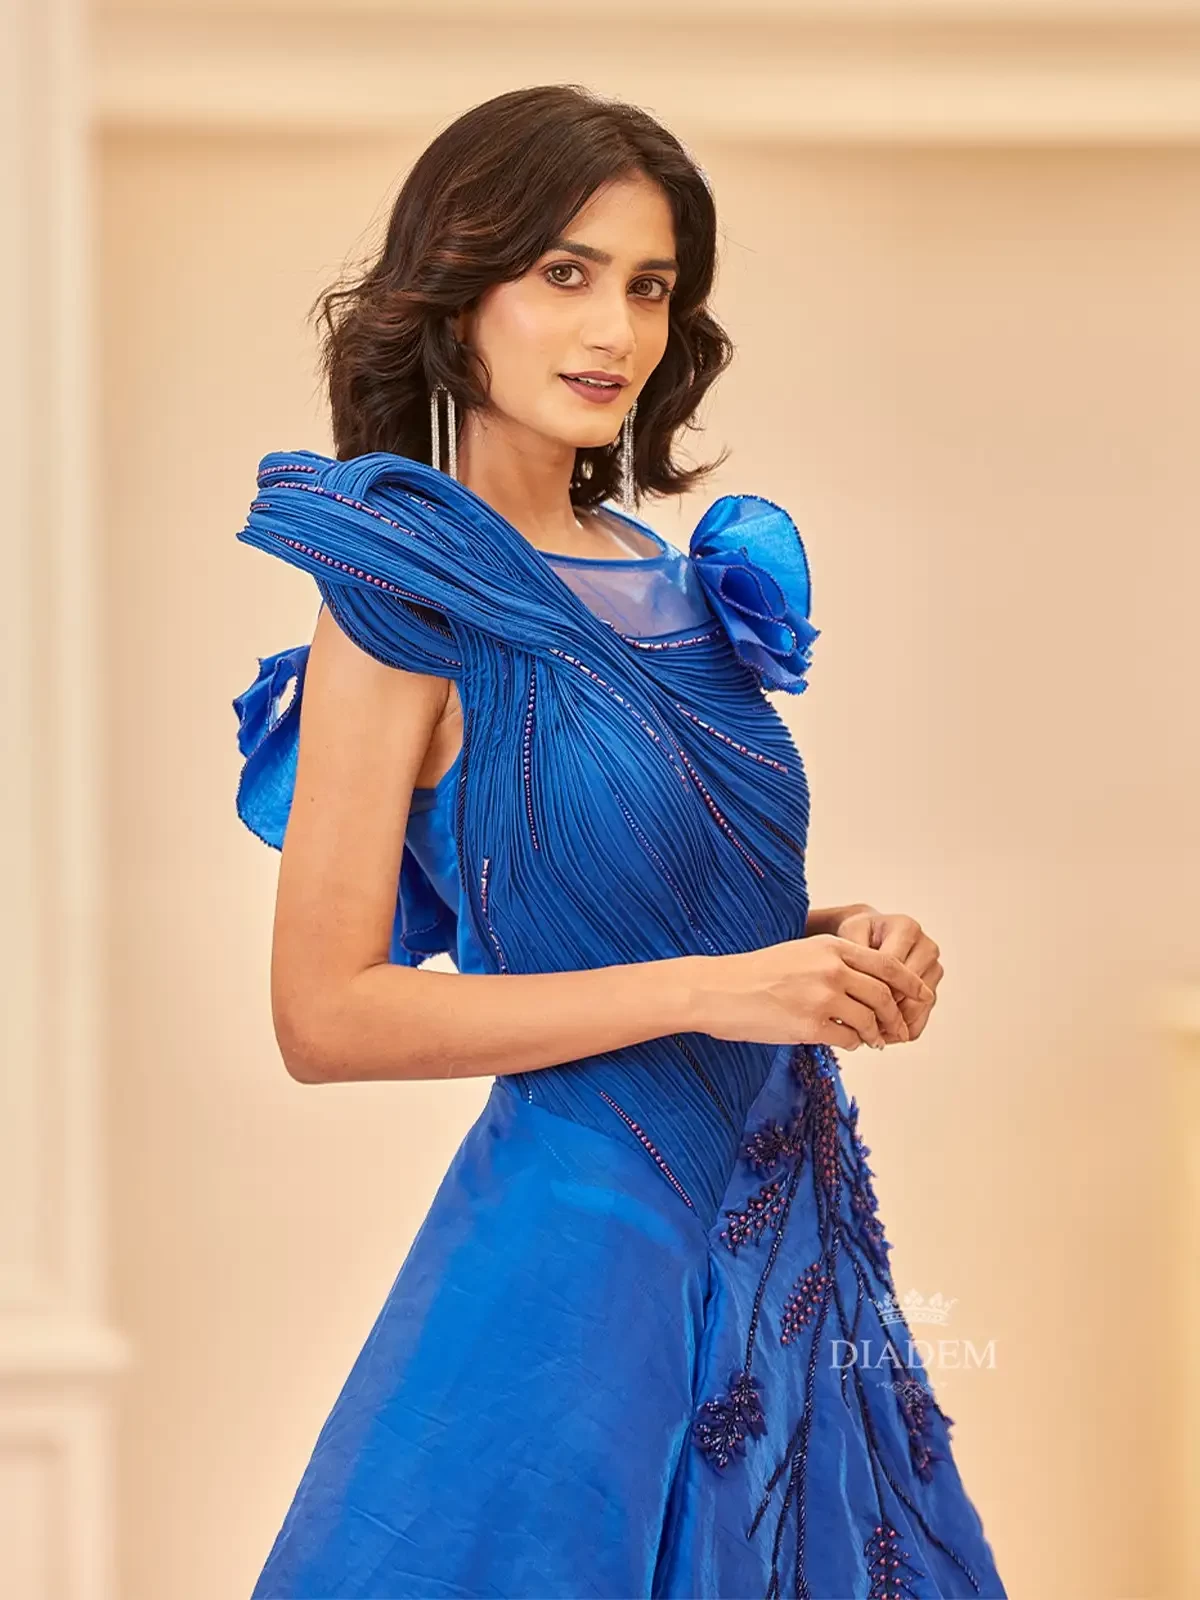 Sapphire Blue Gown Adorned With Floral Crystals And Beads